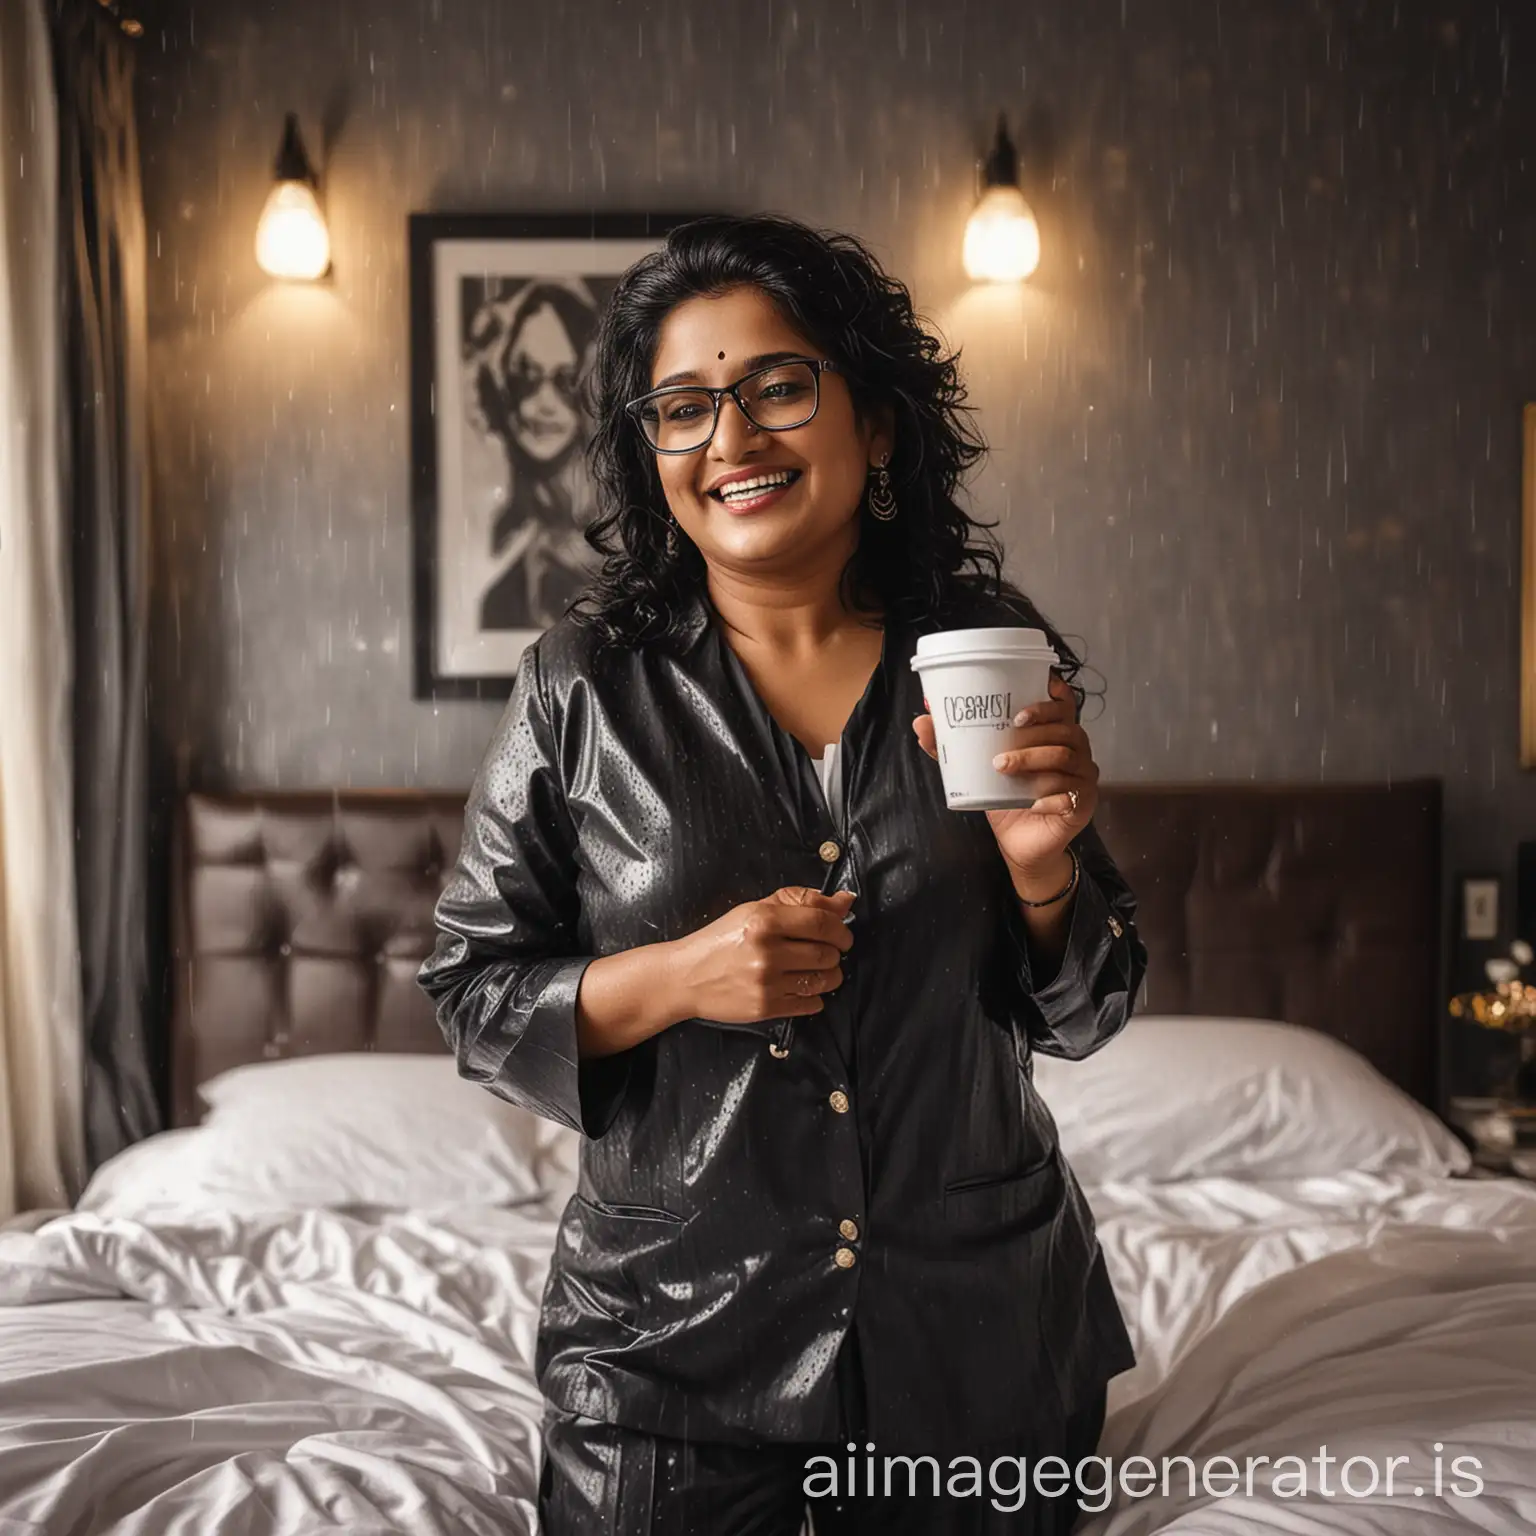 a mature fat indian  woman with 45 years old age wearing Prescription Eyeglasses on face with curvy body wearing a judge suit with full make up ,open hair style, holding a   cup of coffee  , sleeping  on a luxurious bed , she is happy and smiling, its evening and raining  and a lot of lights are there, she is wet  and a indian muscular man is near her